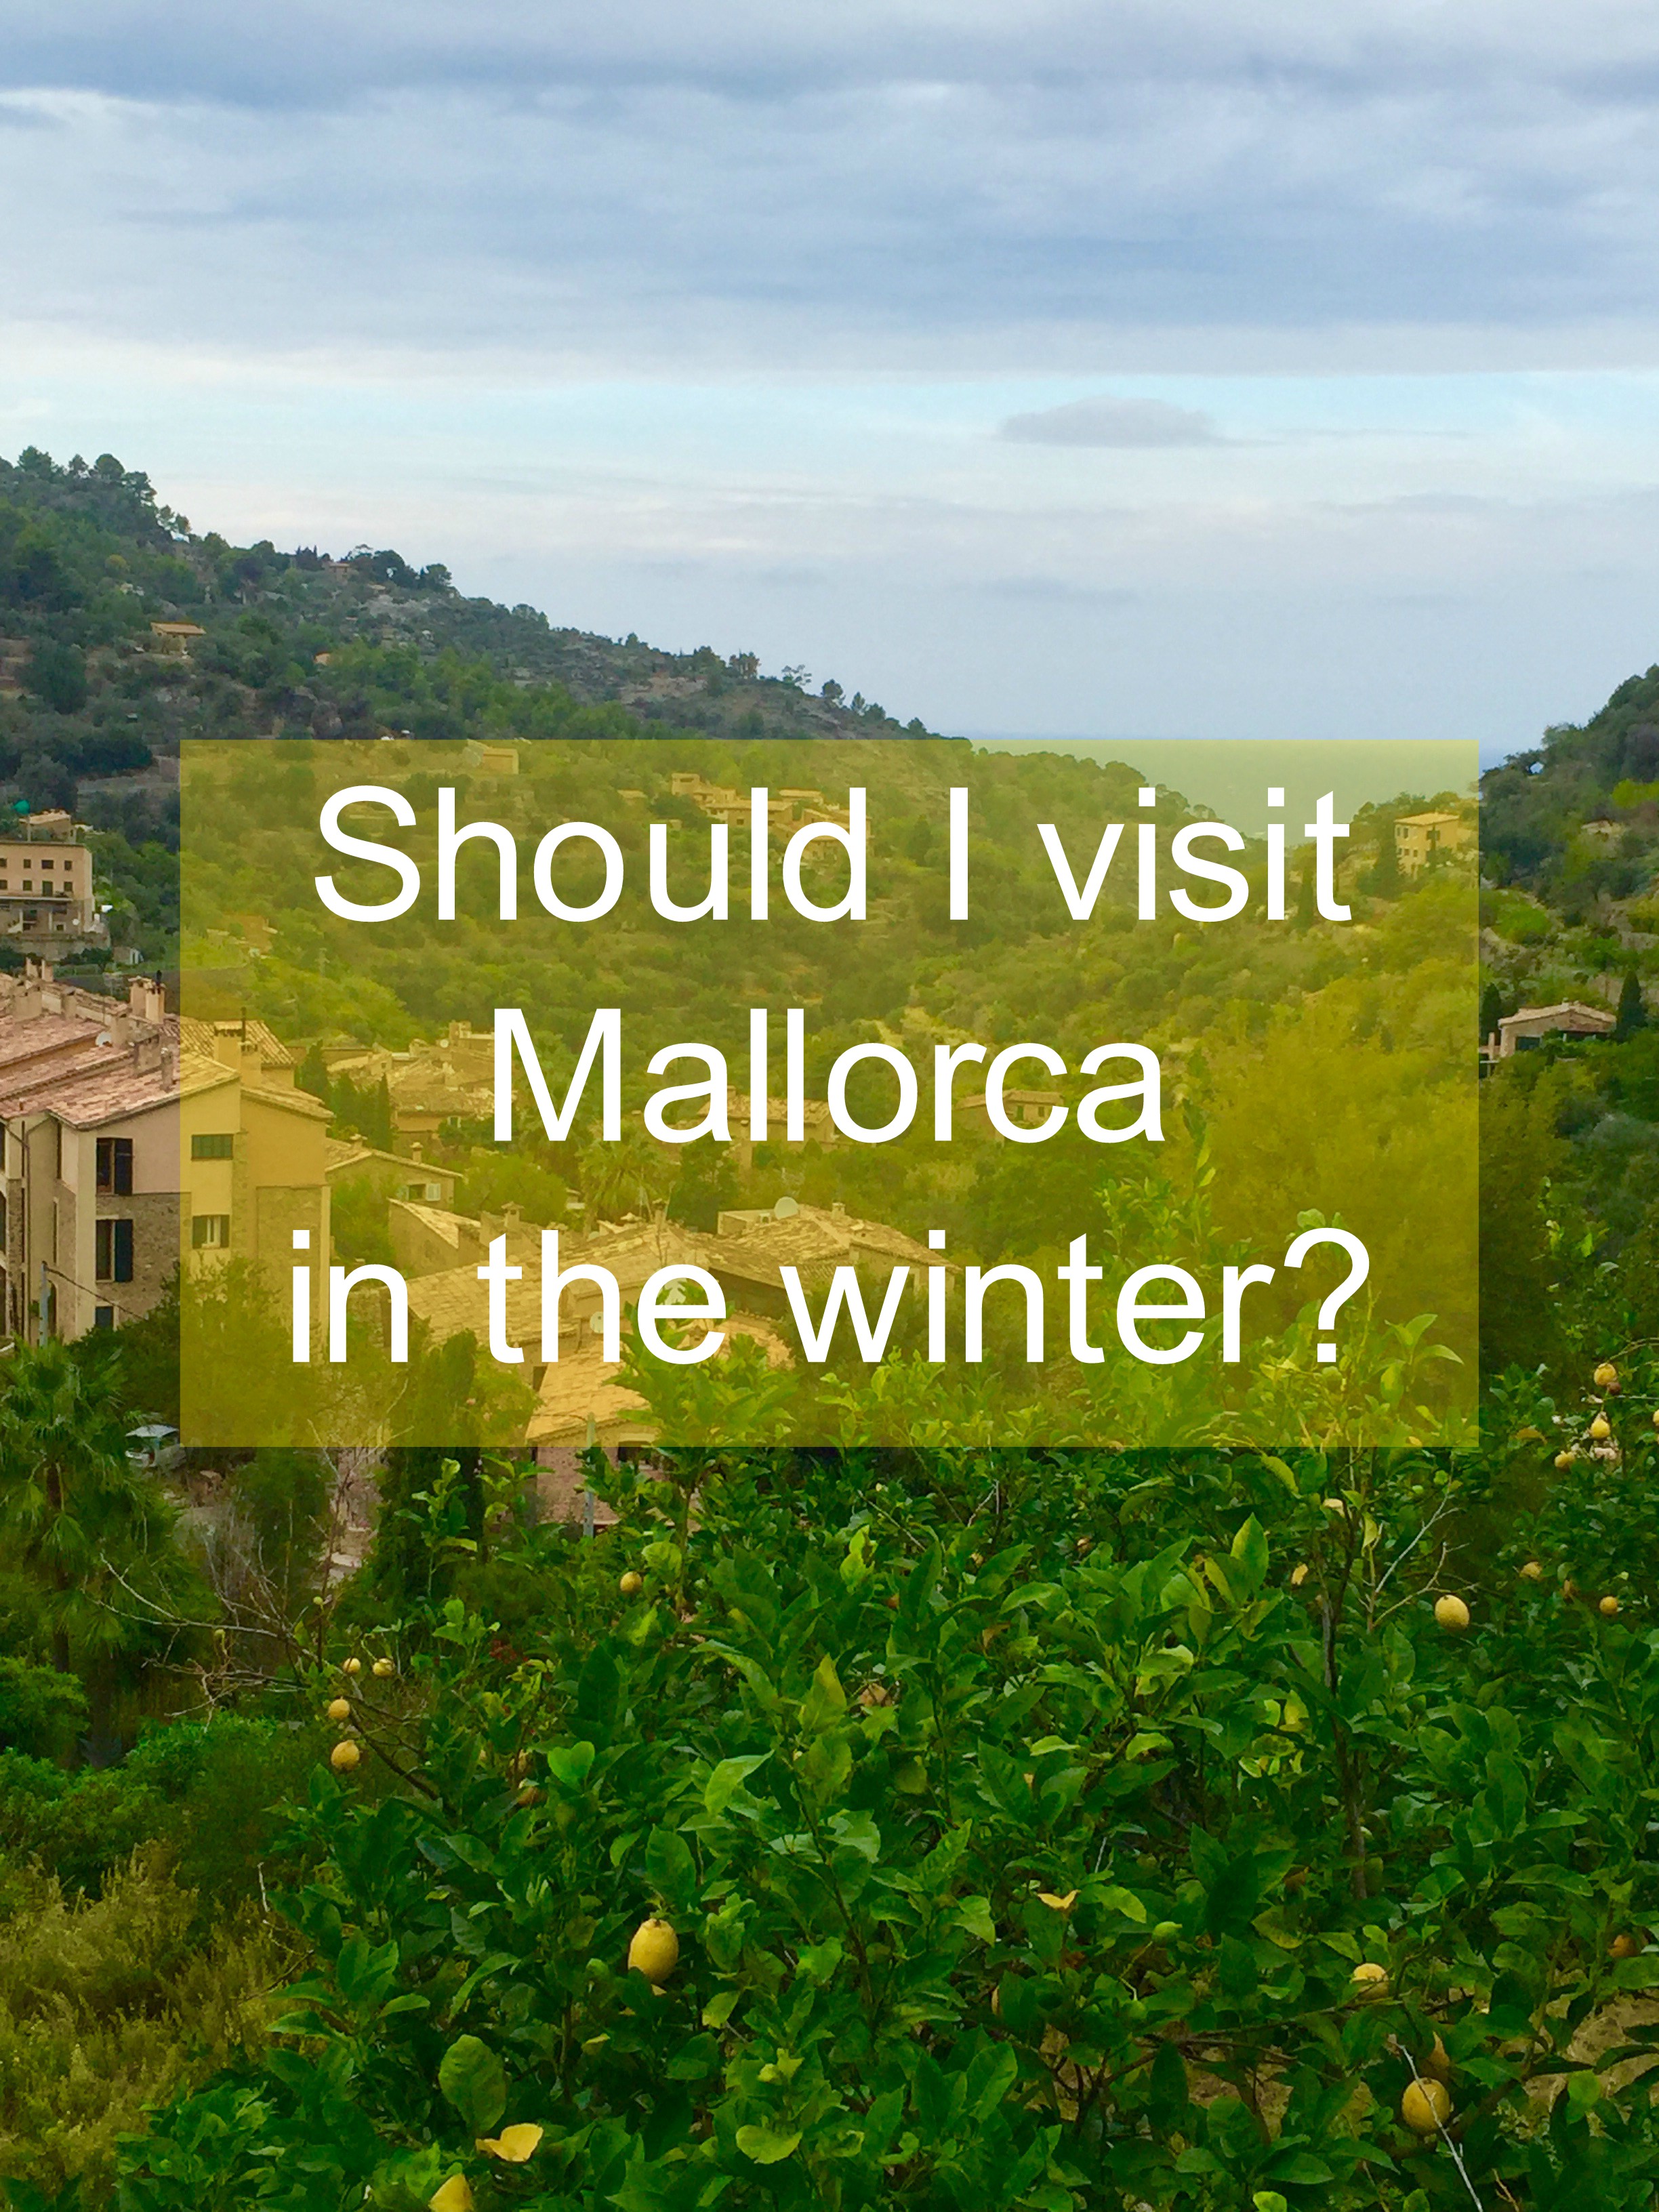 10 reasons to visit Mallorca in the winter?